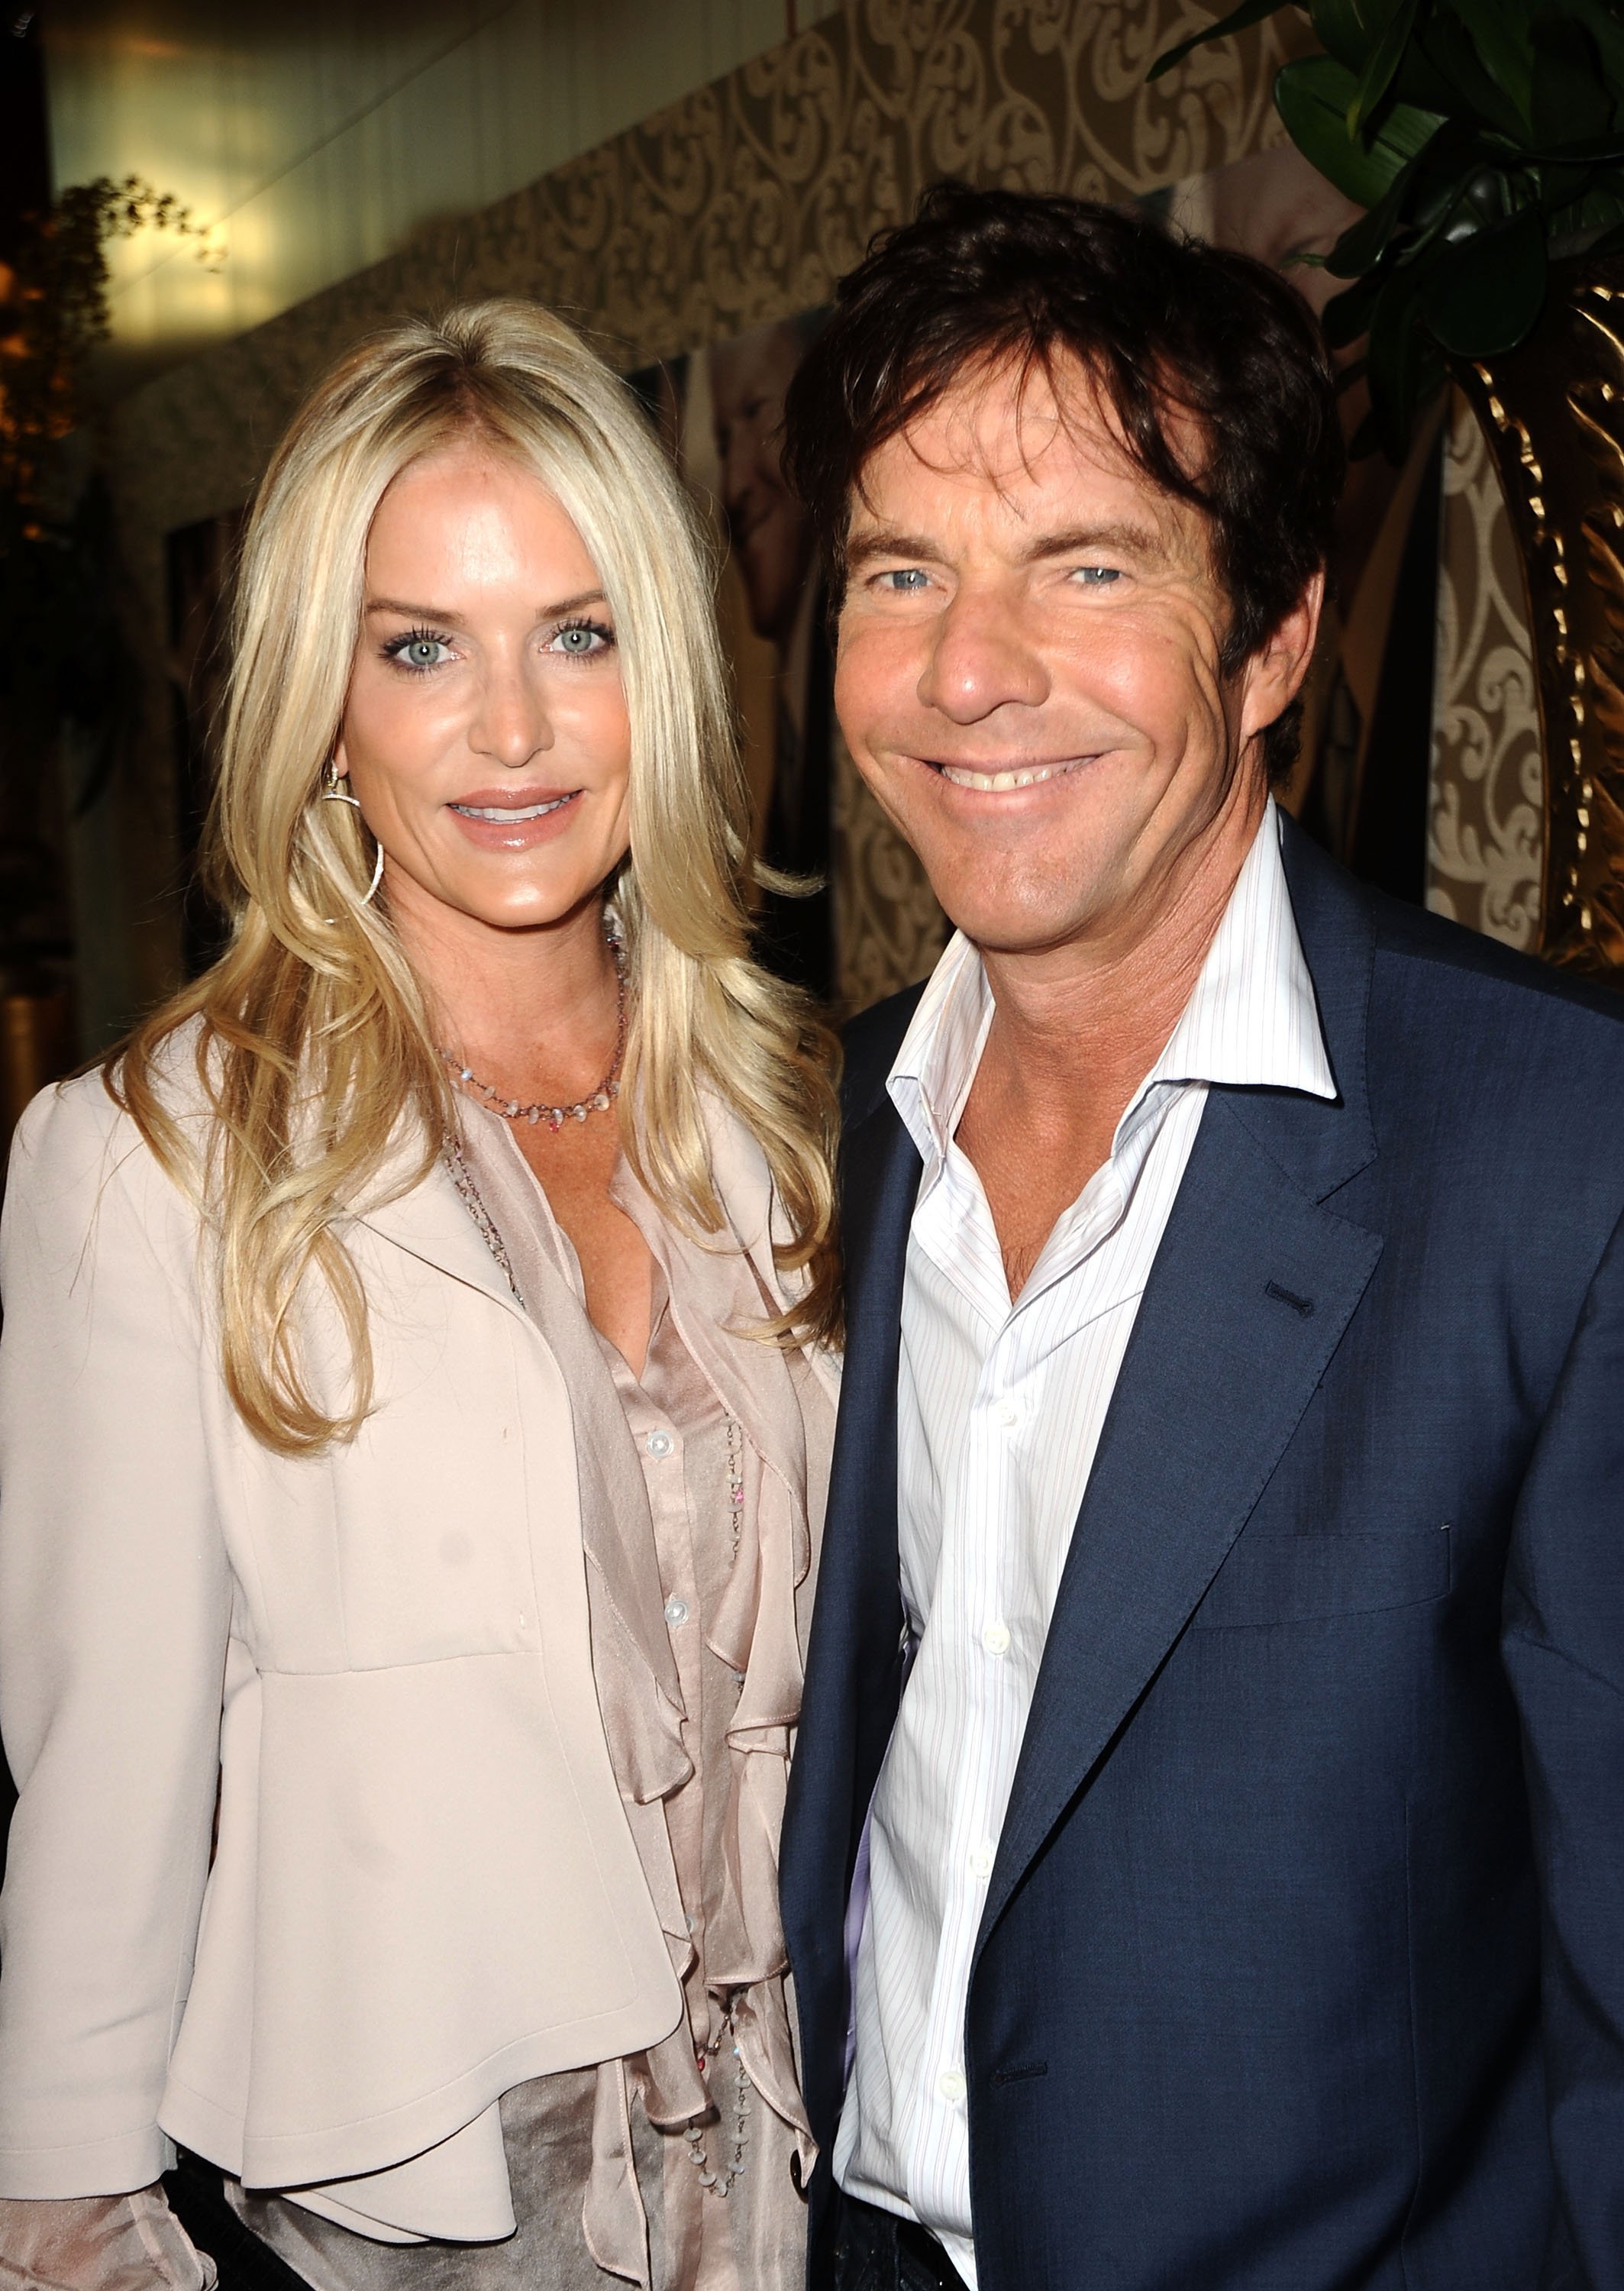 Dennis Quaid and Kimberly Buffington at the HBO premiere of The Special Relationship held at Directors Guild Of America on May 19, 2010, in Los Angeles | Source: Getty Images